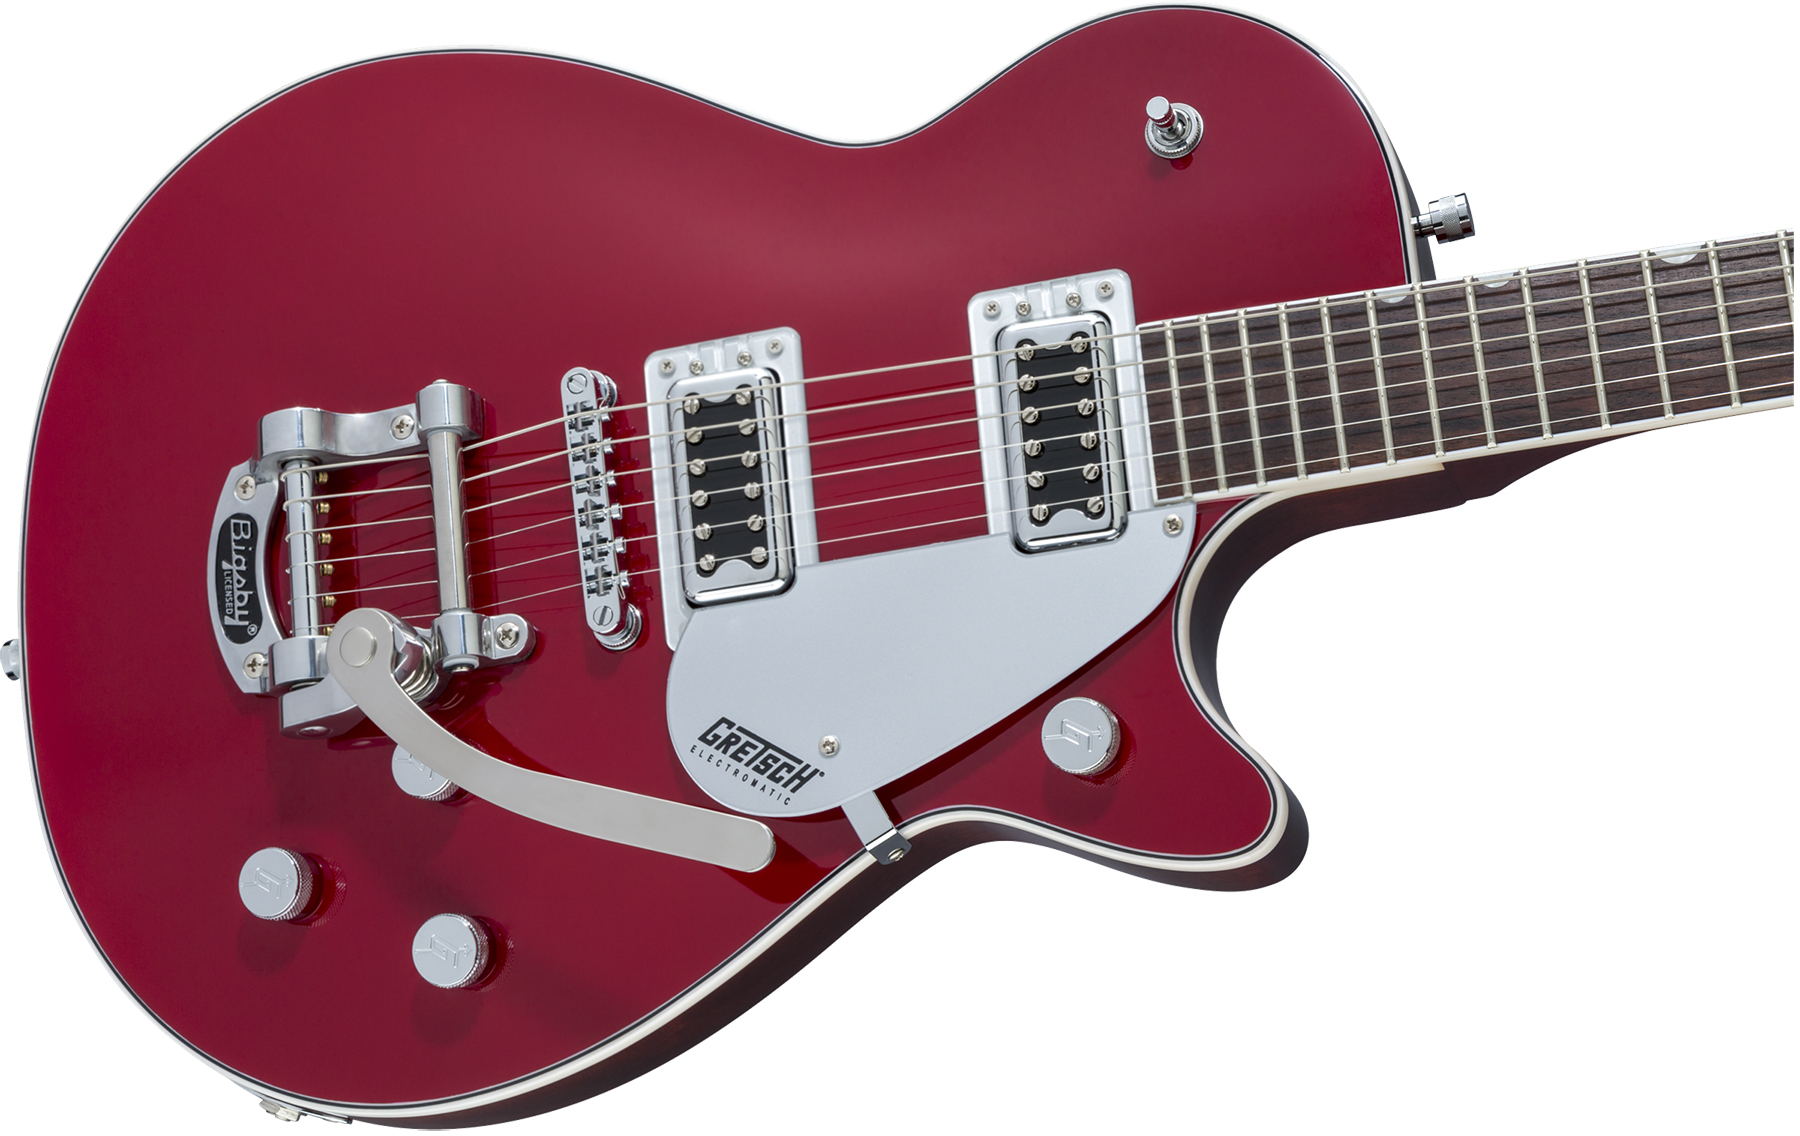 Gretsch G5230t Electromatic Jet Ft Single-cut Bigsby Hh Trem Wal - Firebird Red - Guitare Électrique Single Cut - Variation 2